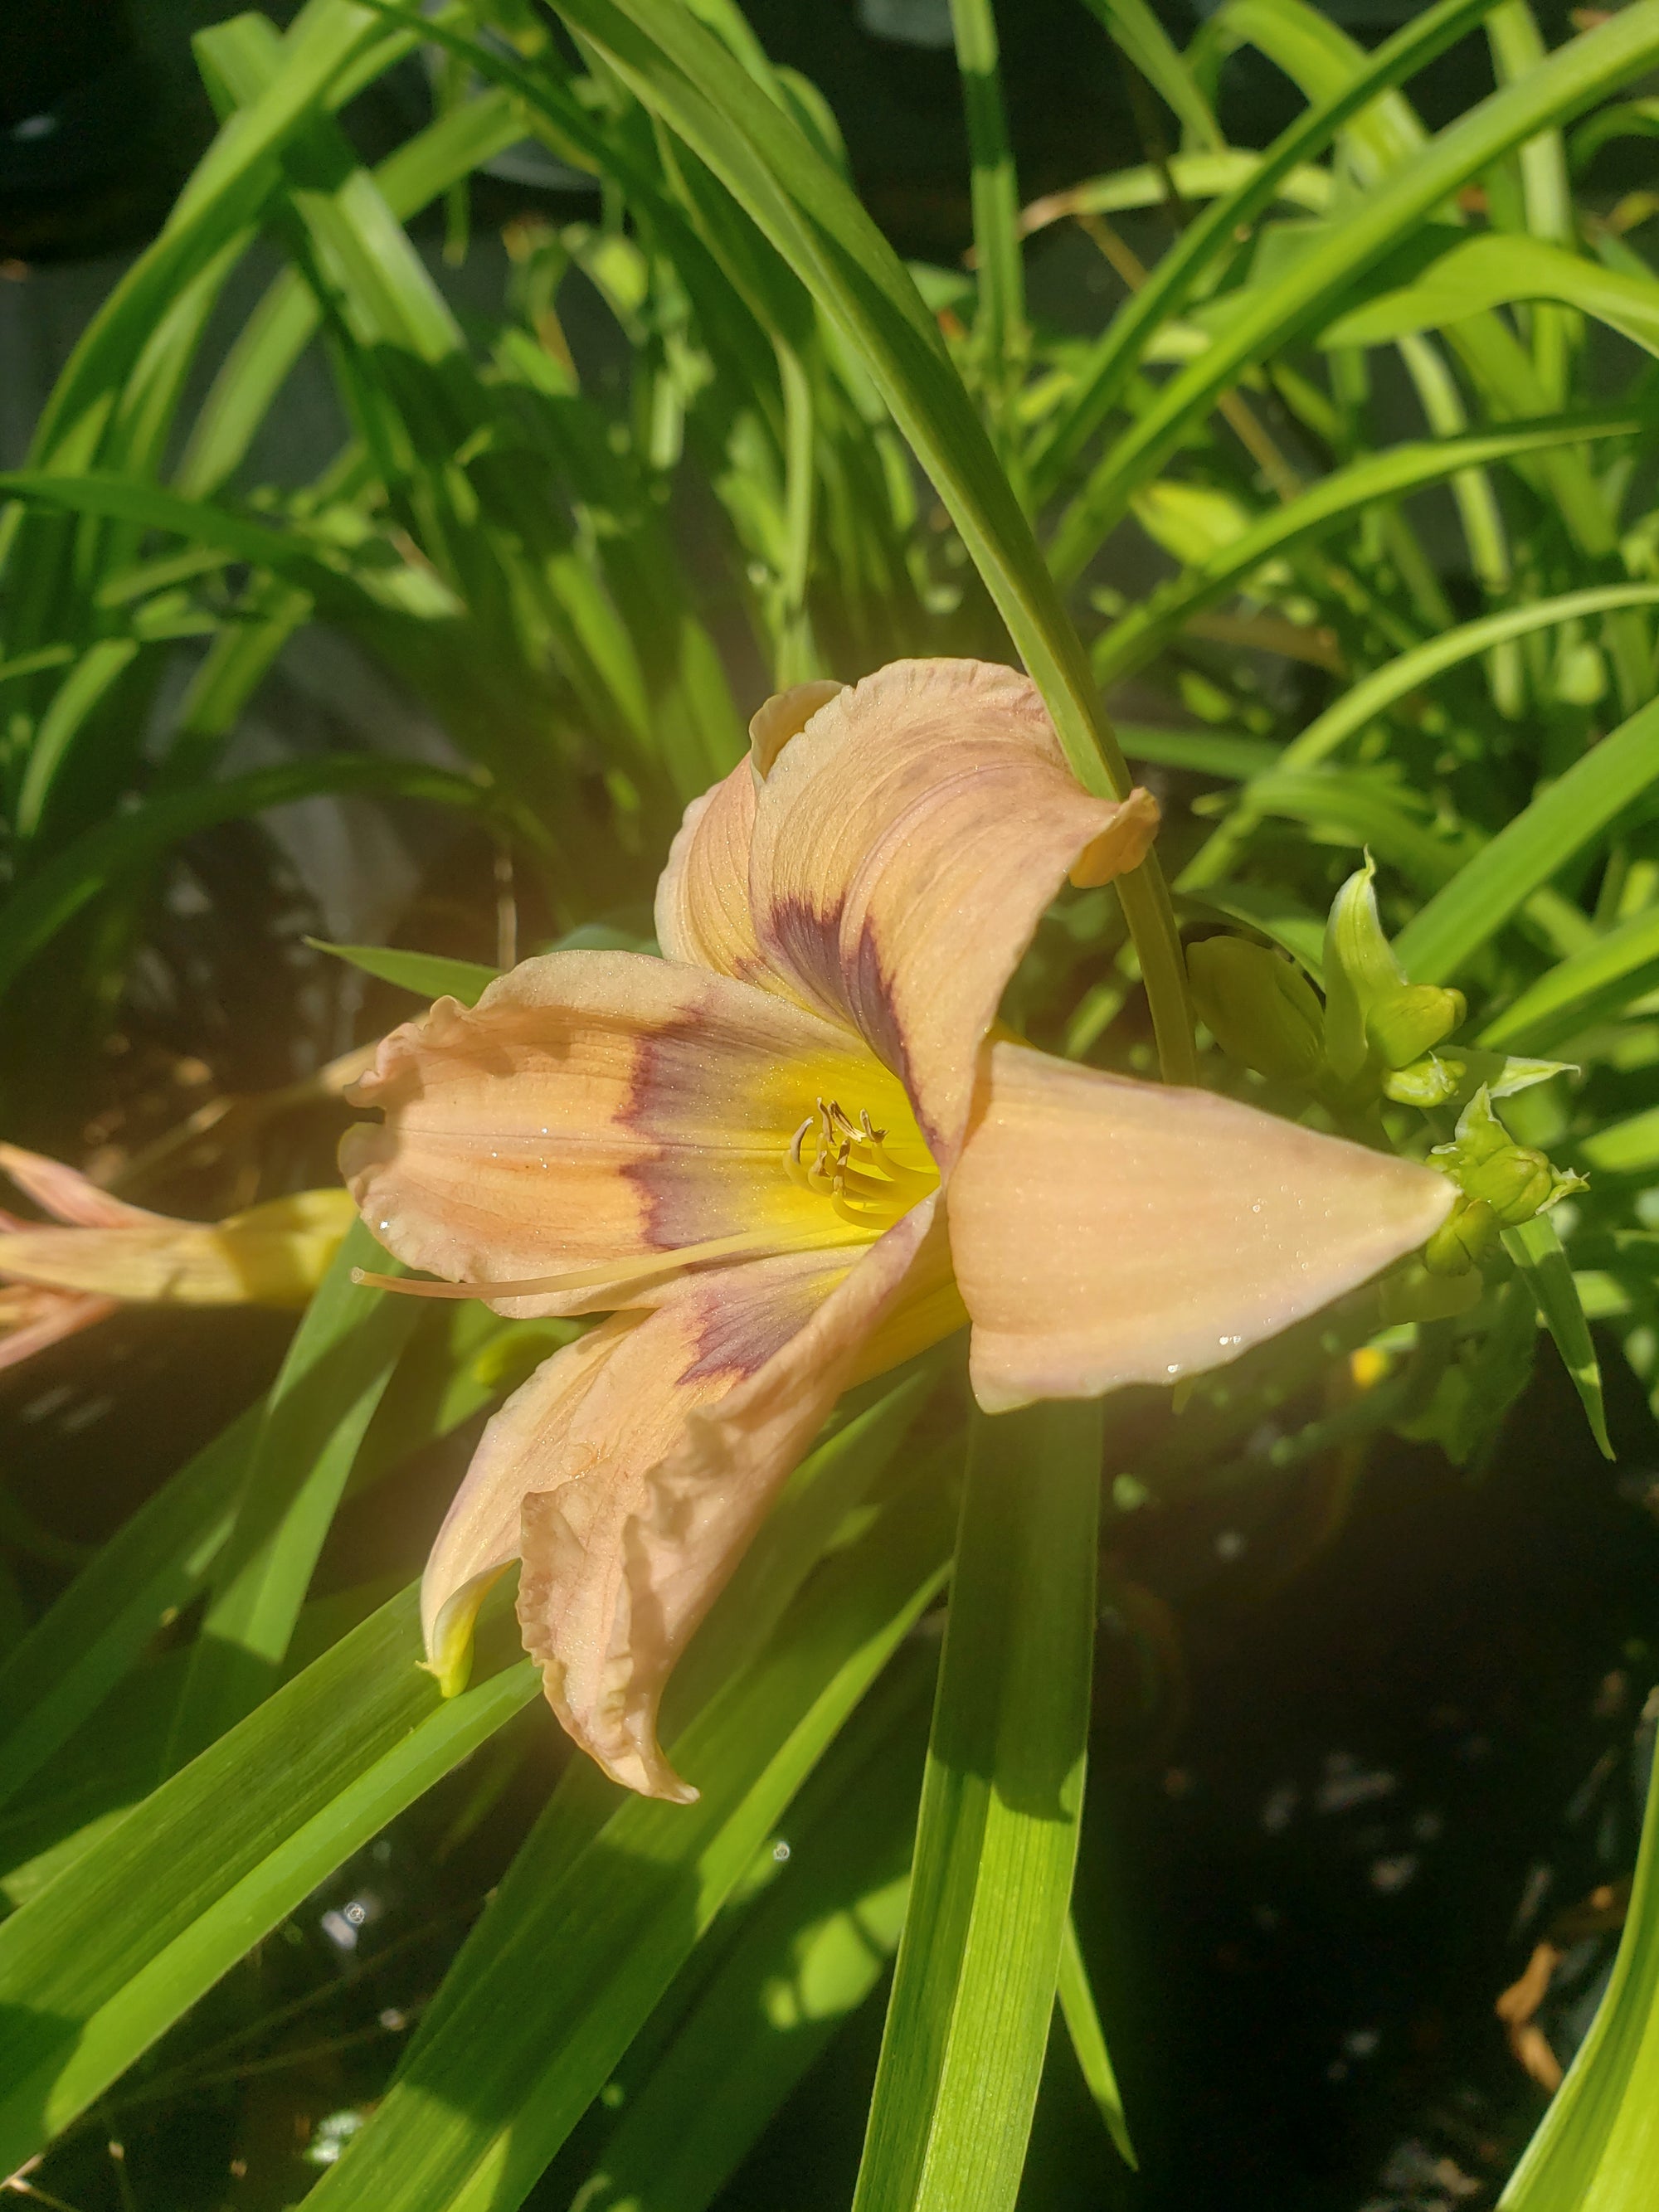 Lily DAY LILIES ASSORTED - Advanced Nursery Growers